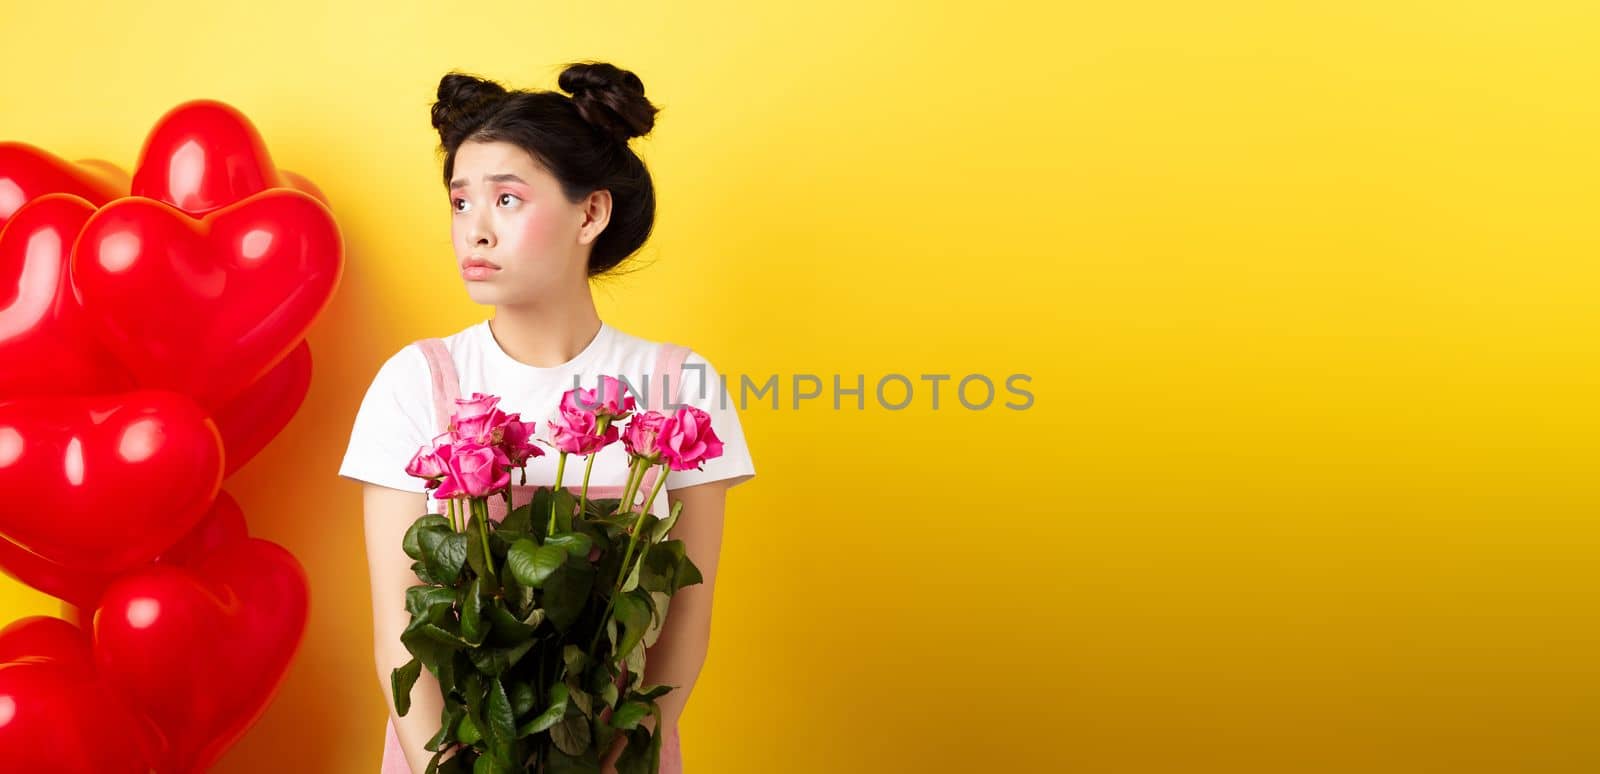 Happy Valentines day. Sad and lonely girl looking left upset, holding bouquet of roses, standing alone near red hearts balloons and frowning, yellow background.